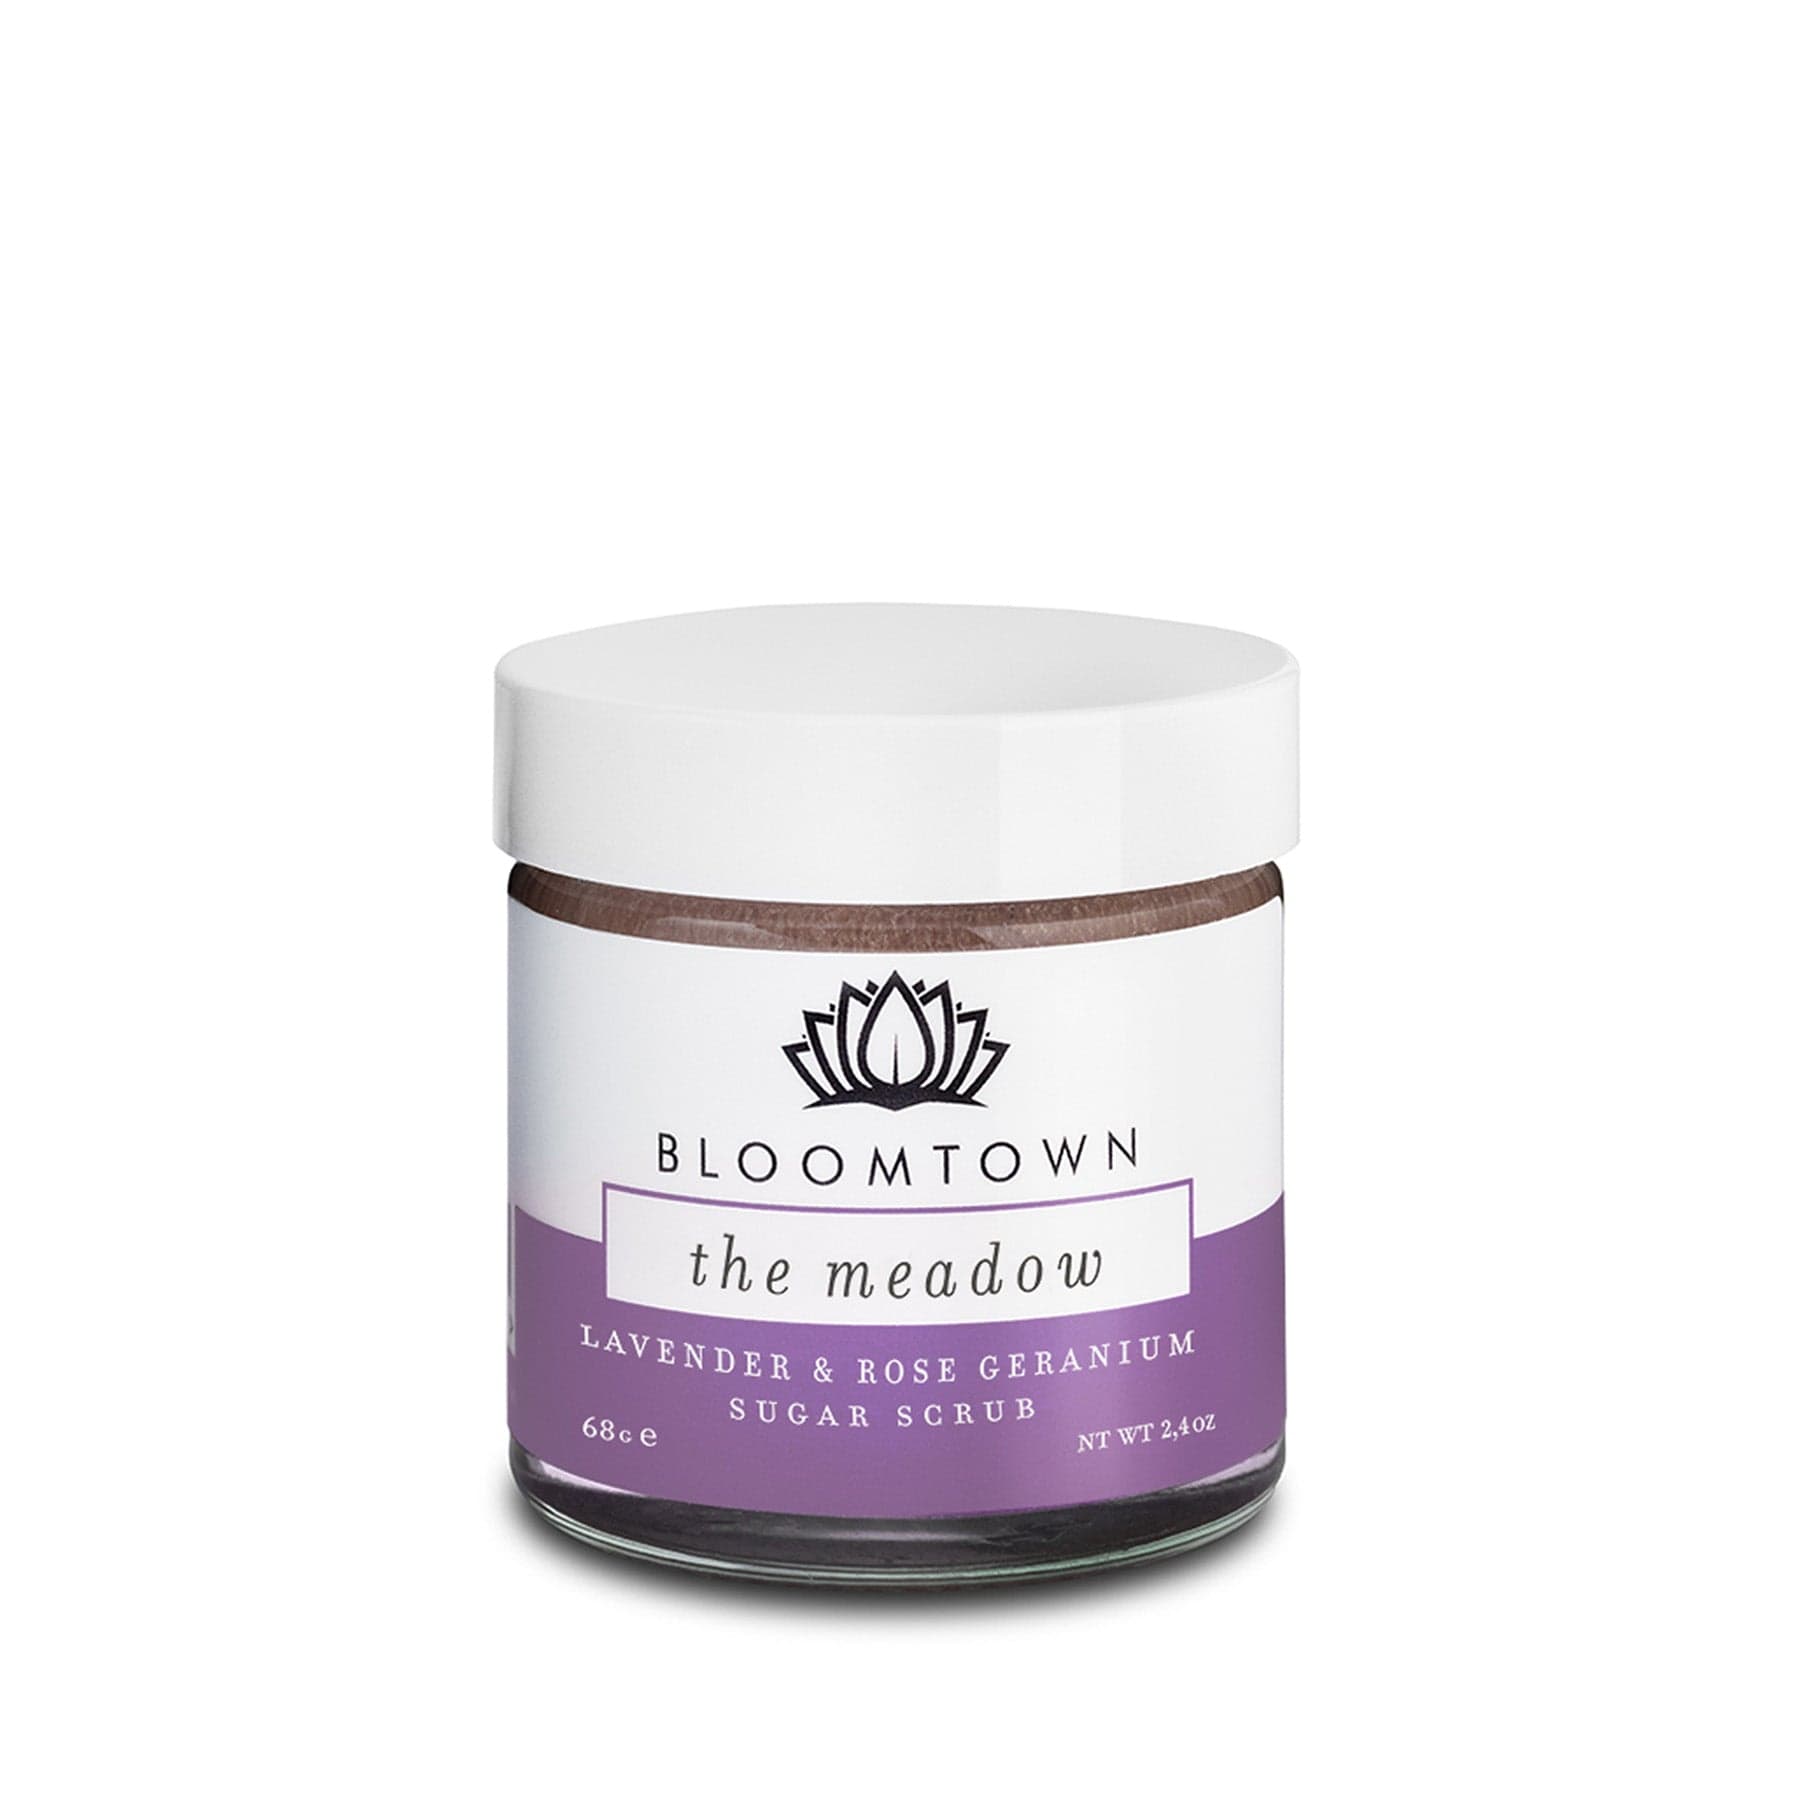 Bloomtown The Meadow Lavender and Rose Geranium Sugar Scrub in white container with purple label, natural skincare exfoliating product.